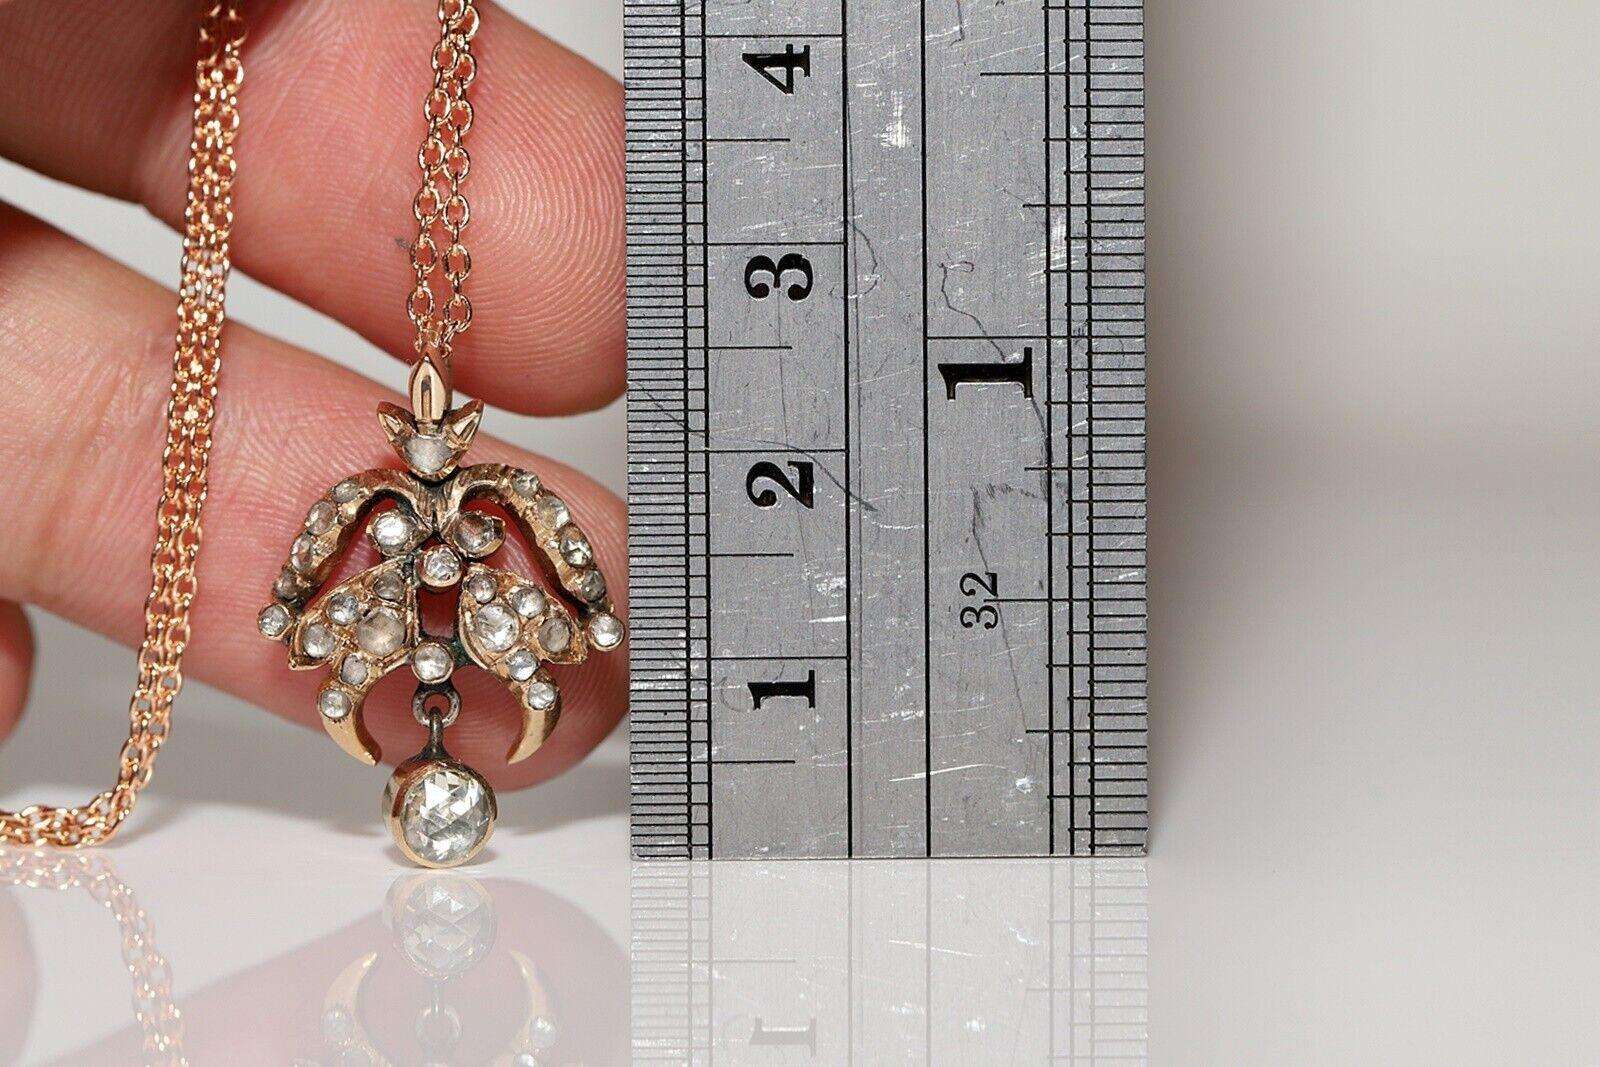 In very good condition.
Total weight is 6.6 grams.
Totally is diamond 0.65 carat.
The diamond is has  H-IJ color and s1-s2-s3 clarity.
Total lenght is chain 50 cm.
Please contact for any questions.